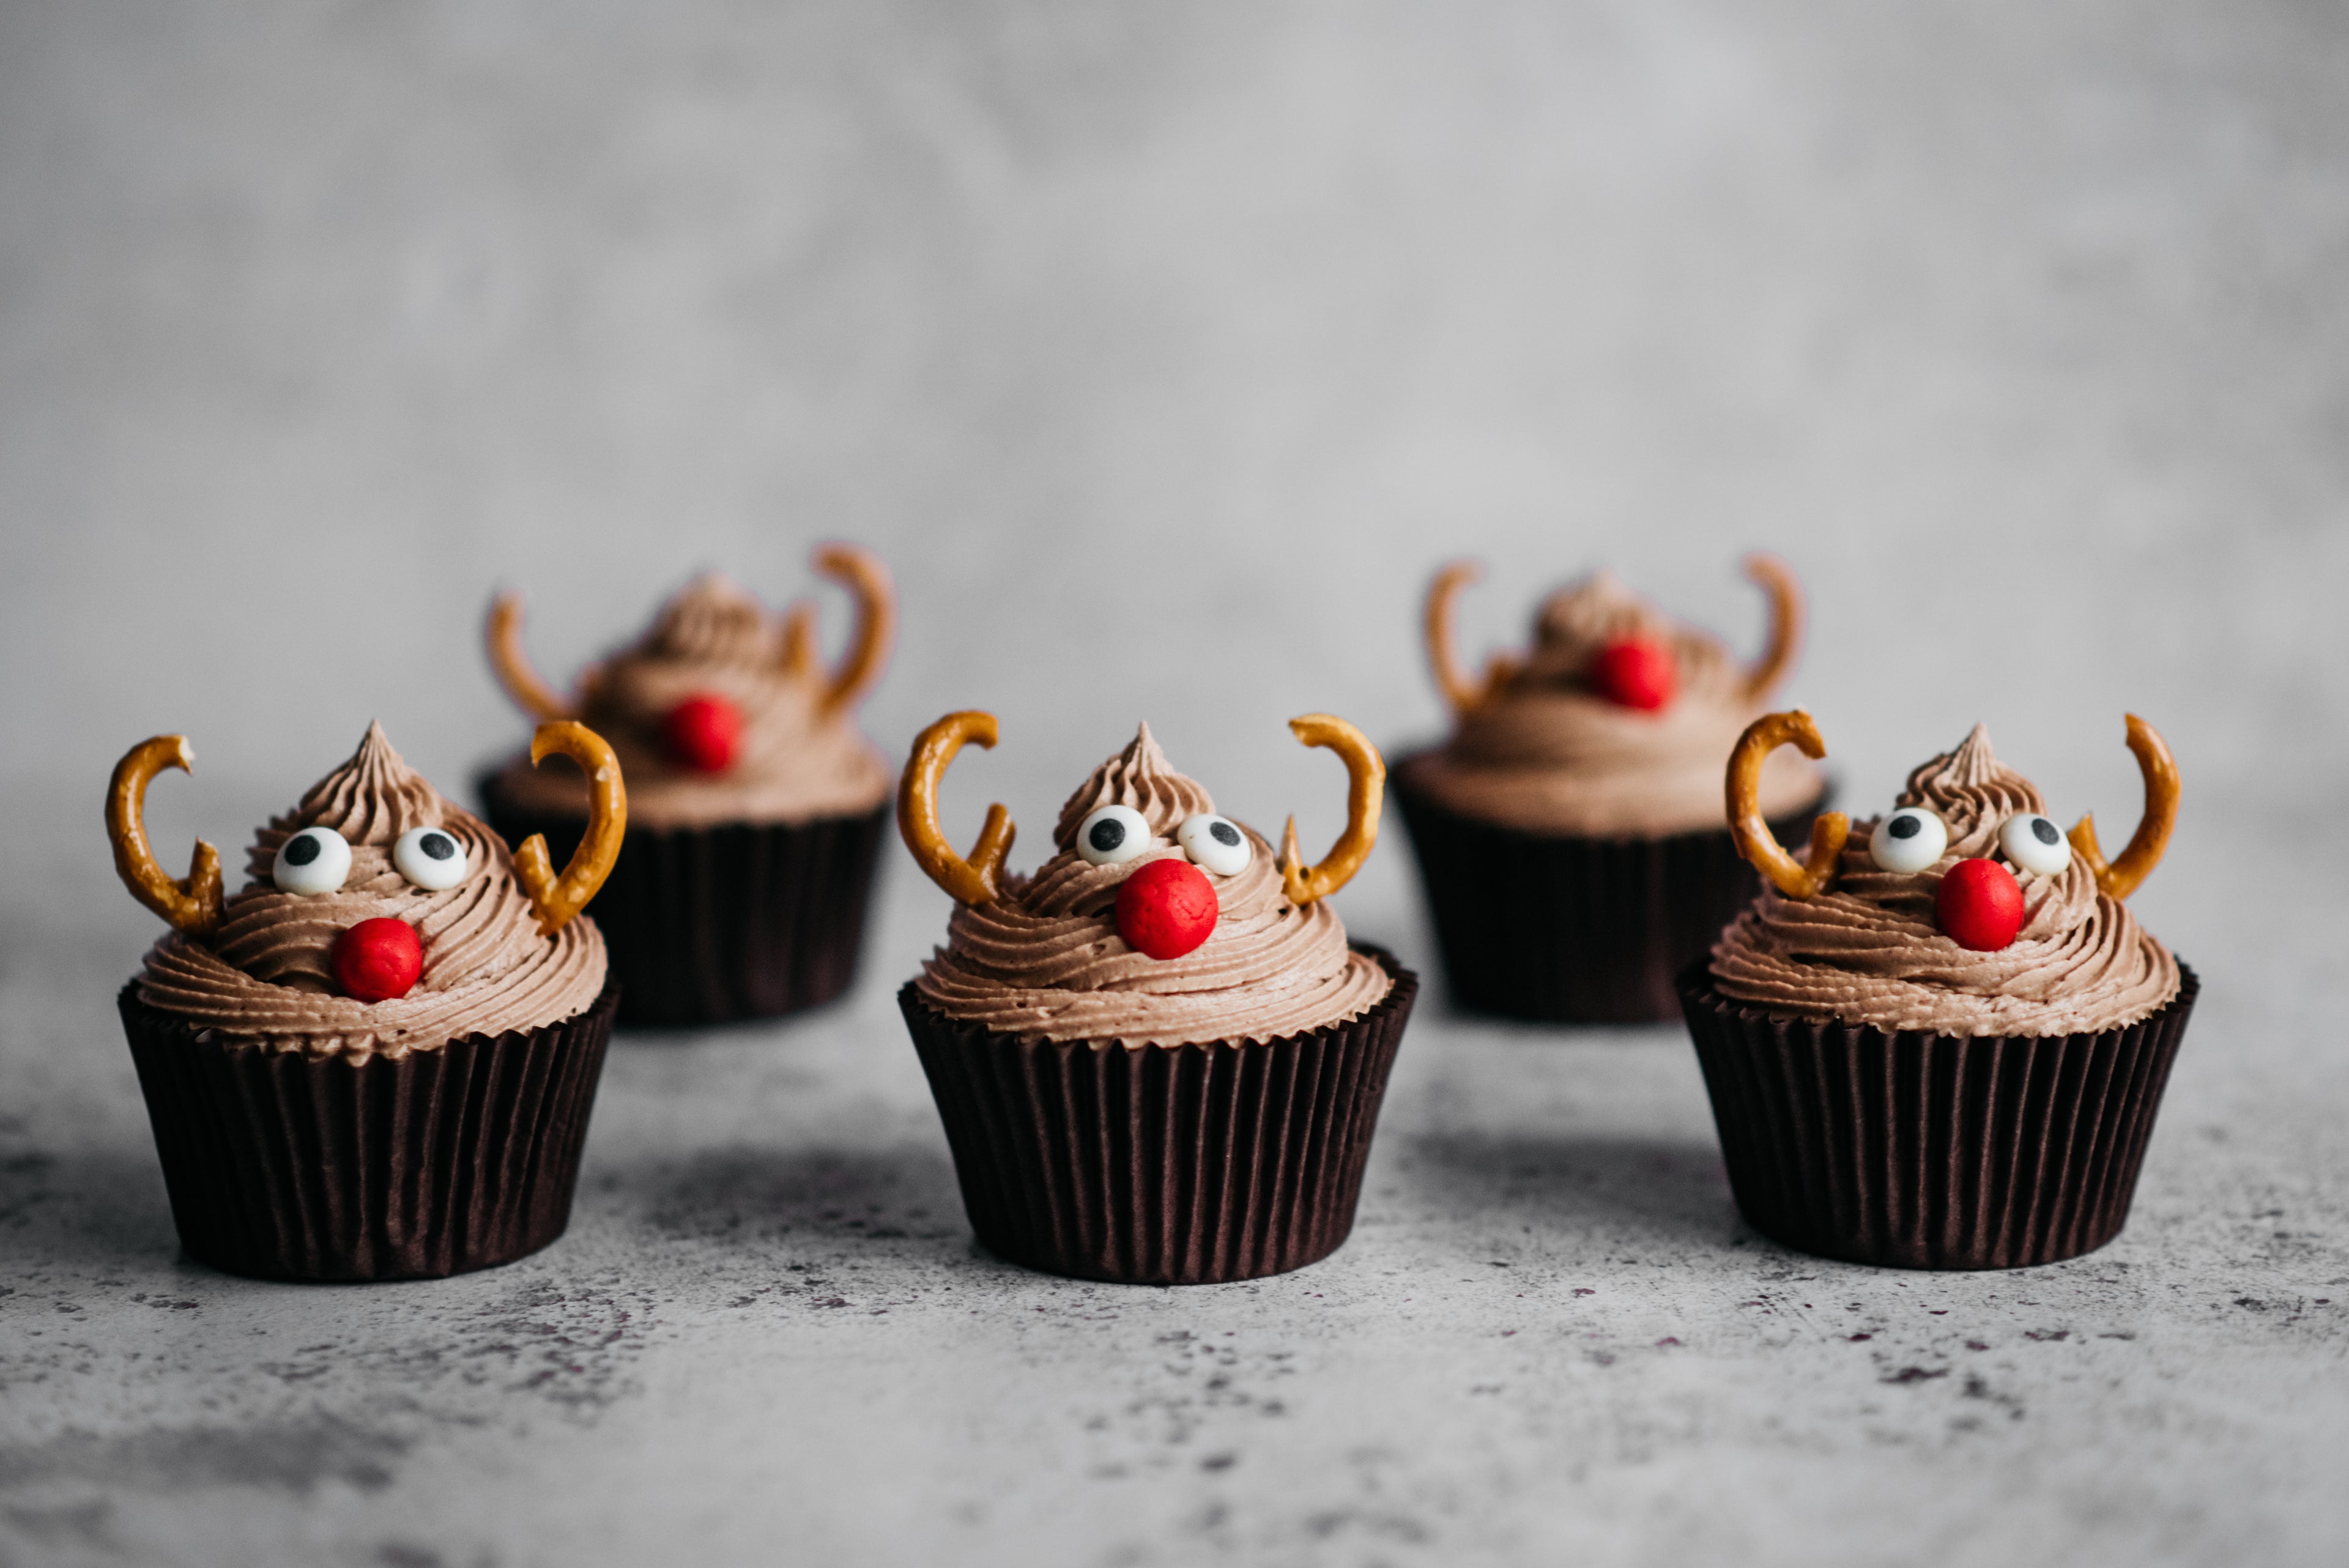 A batch of Reindeer Cupcakes decorated with pretzel antlers, icing eyes and red sweetie noses